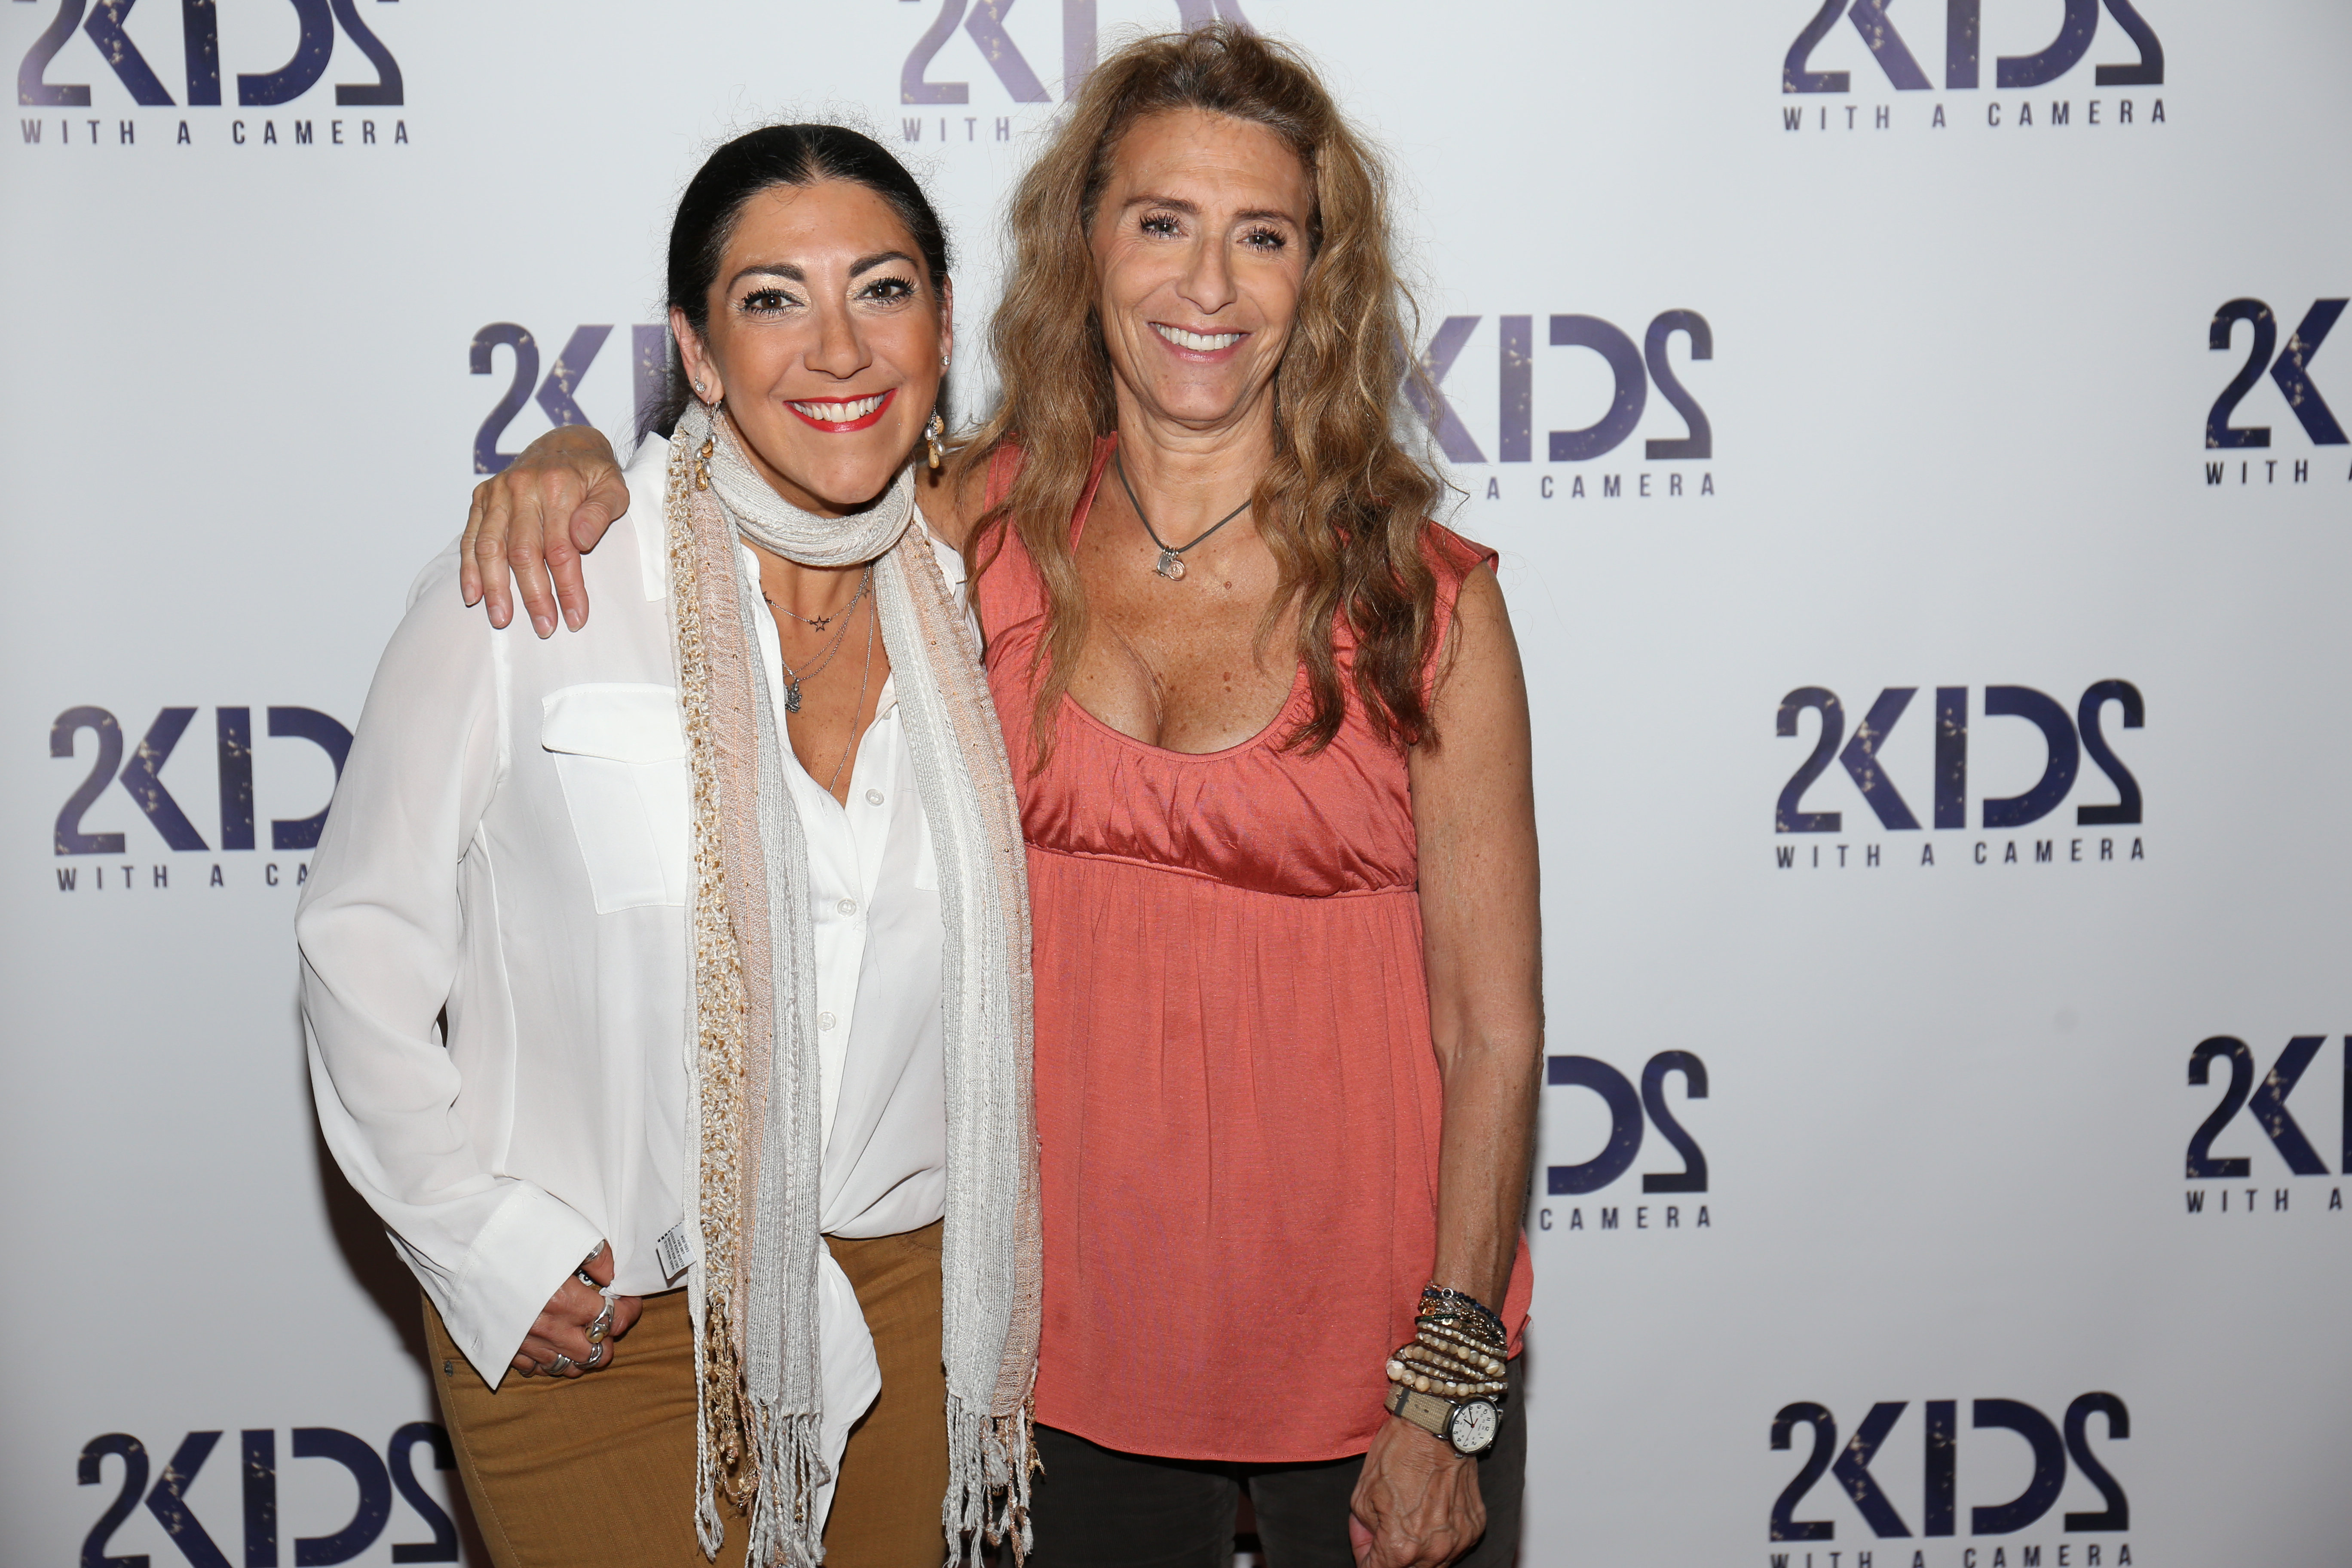 Toni D'Antonio and Sue Crystal at the New York City screening of 